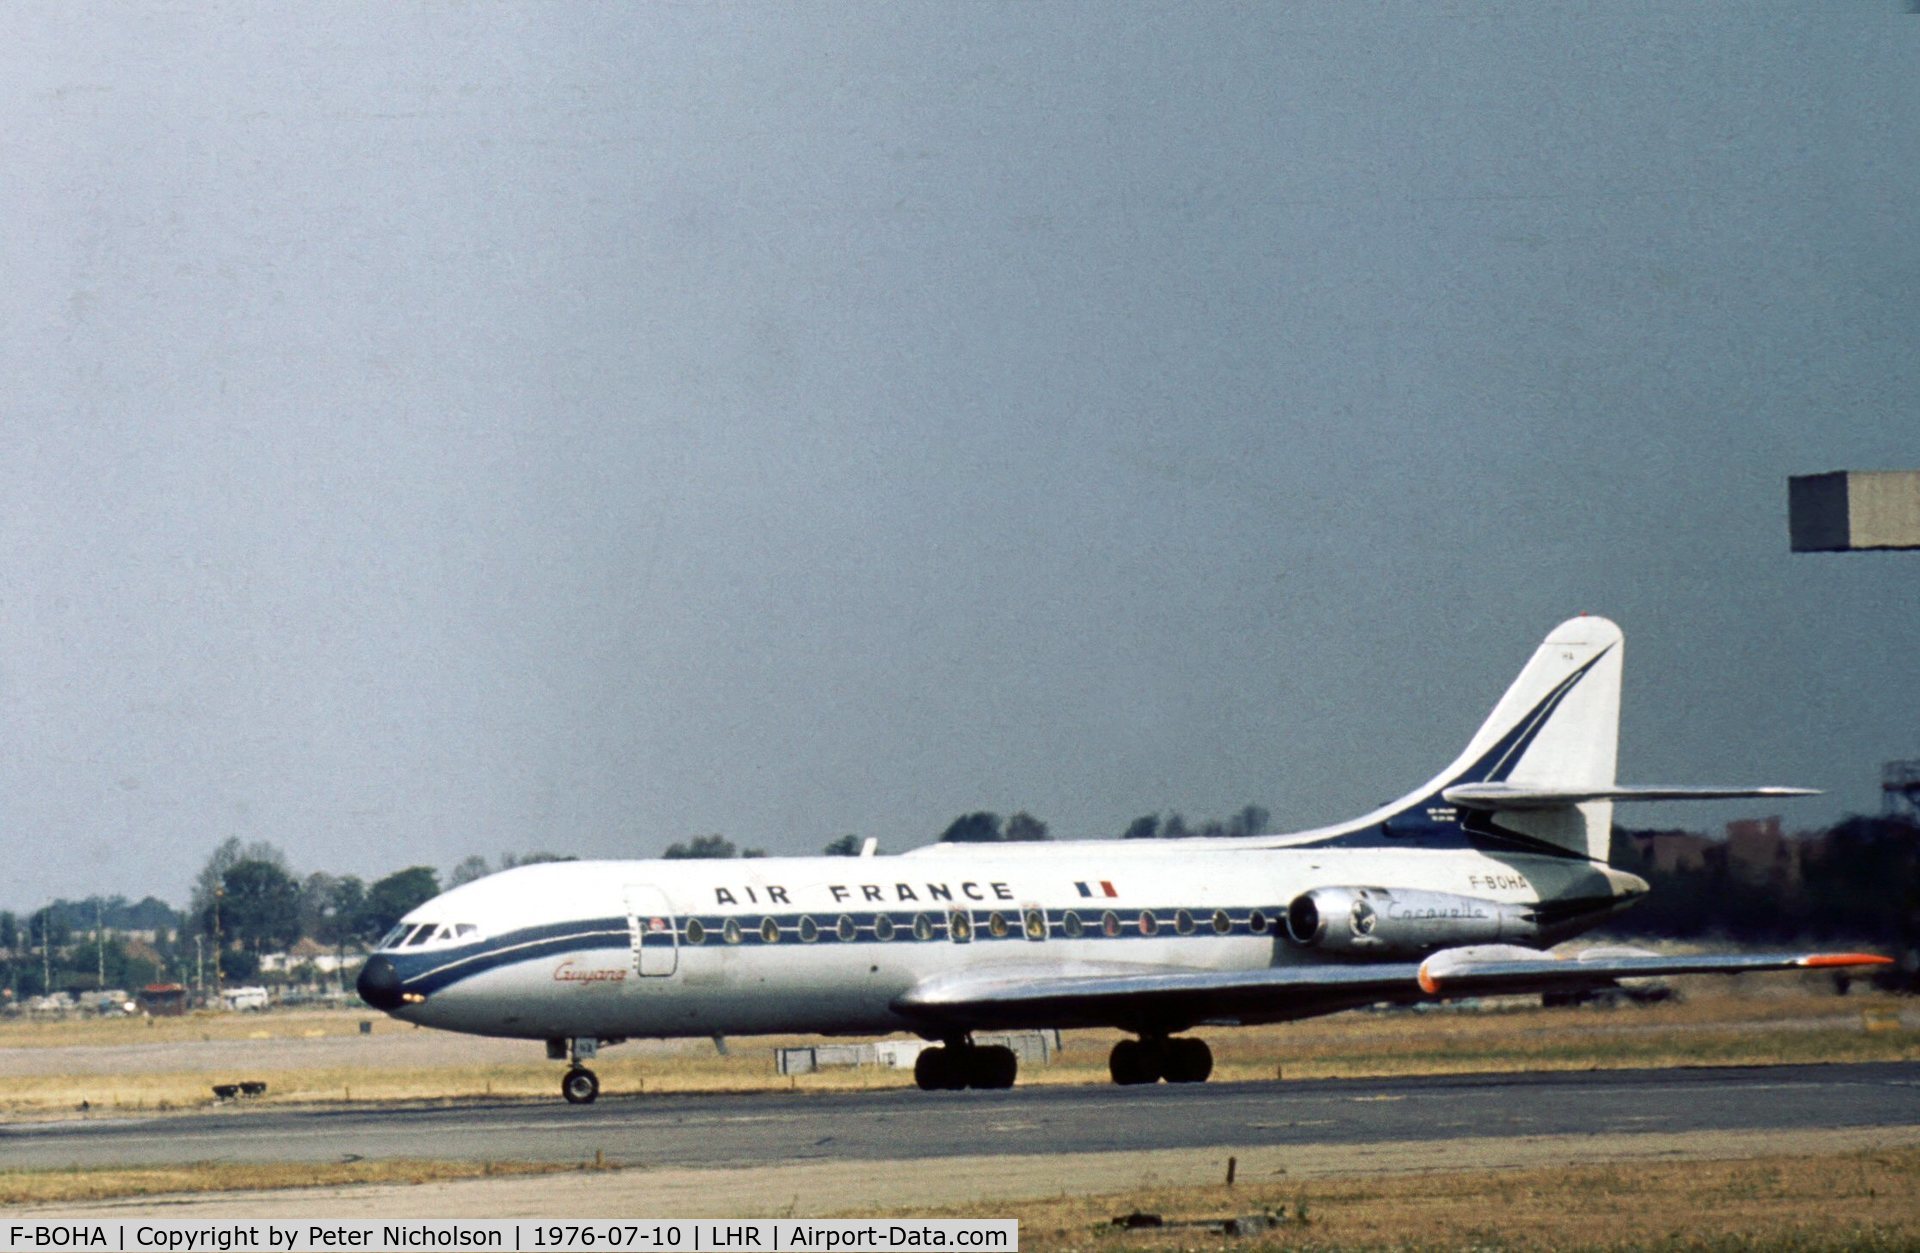 F-BOHA, 1968 Sud Aviation SE-210 Caravelle III C/N 242, Departing from London Heathrow in the Summer of 1976.